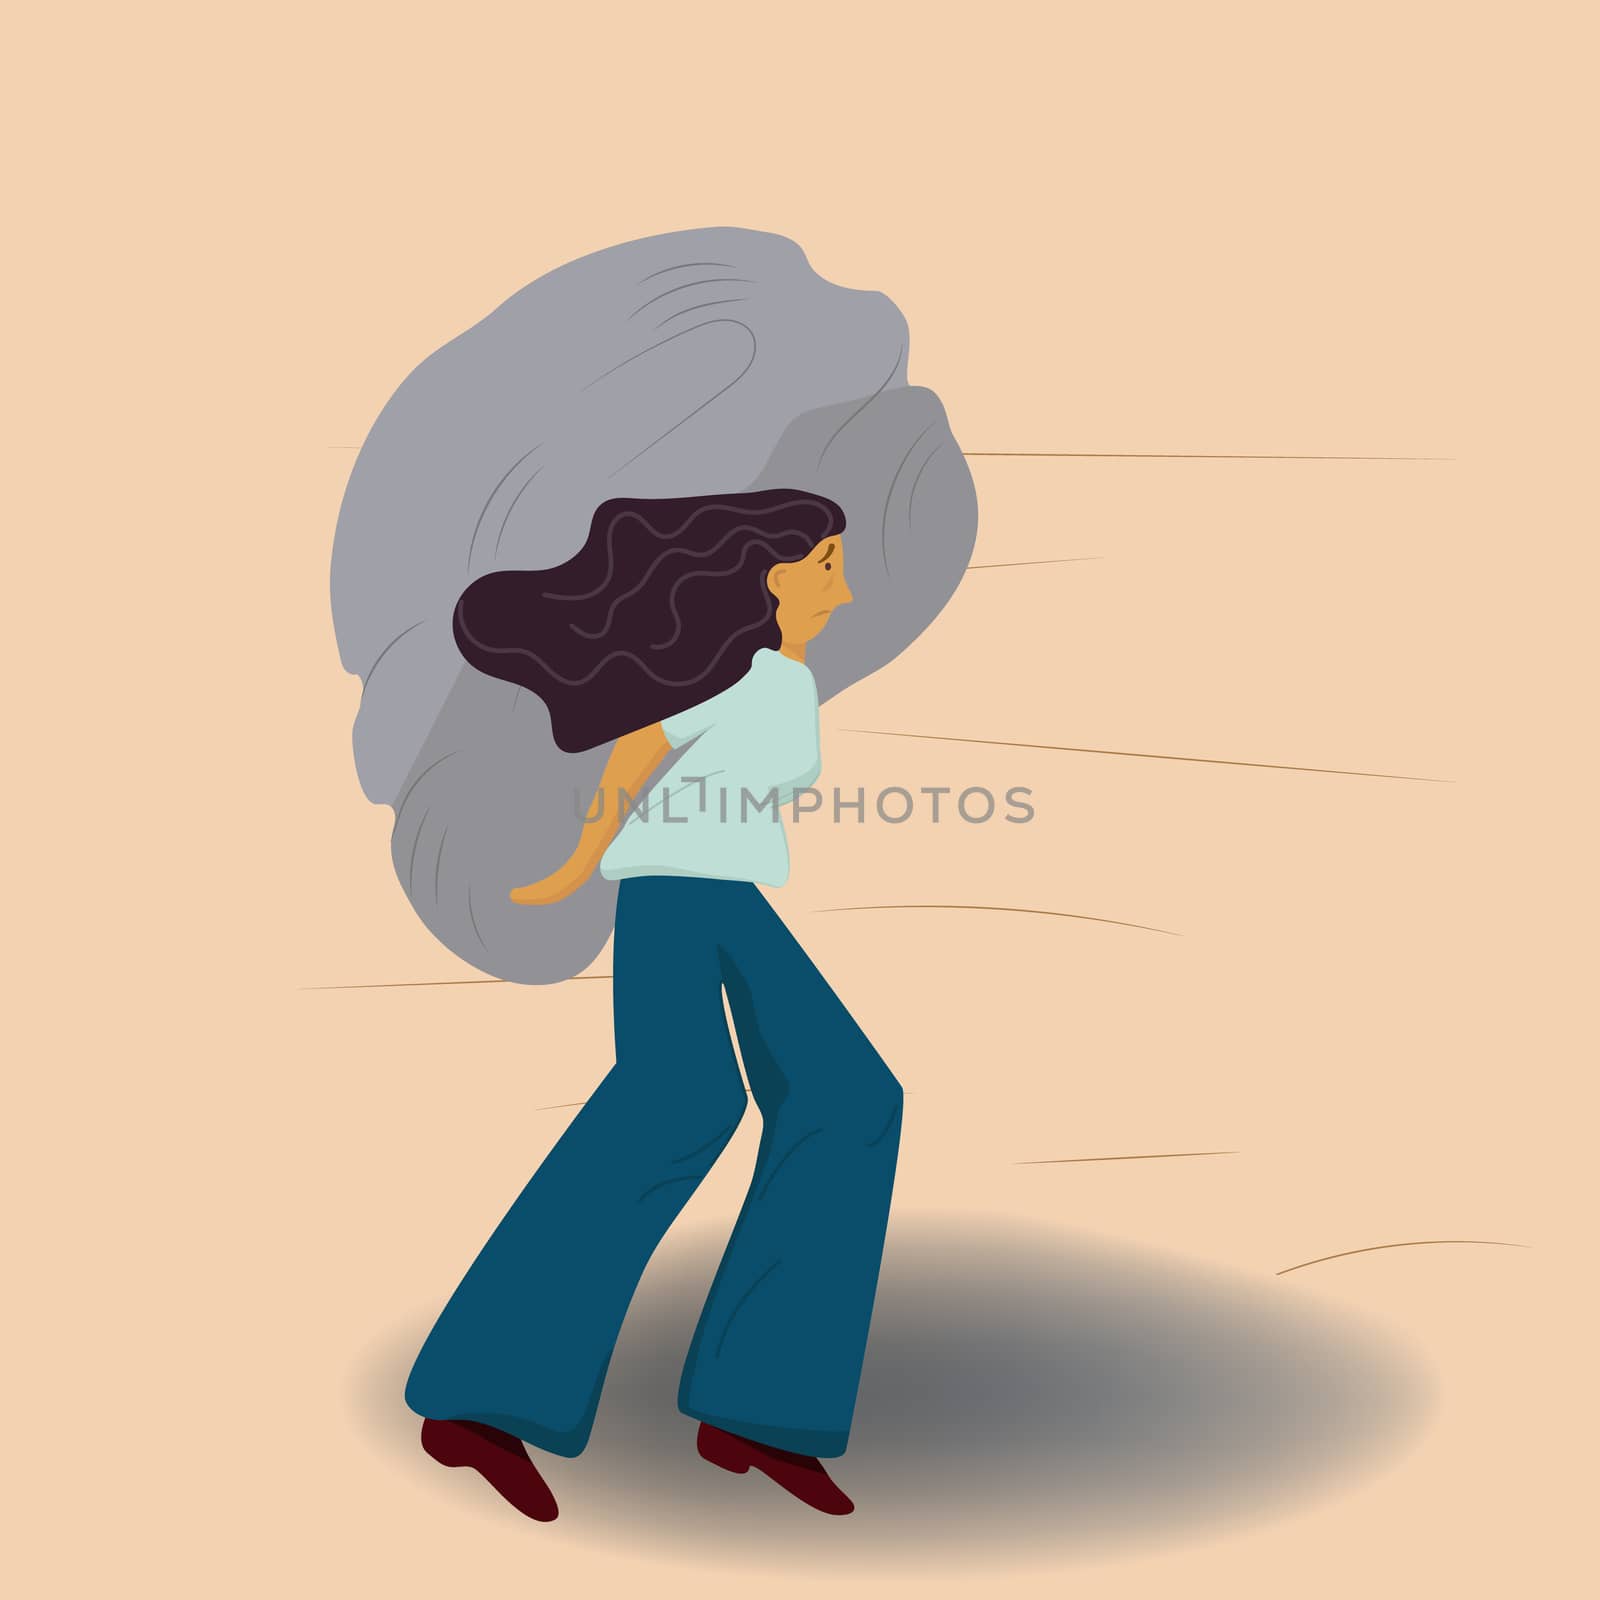  A woman carrying a heavy stone, illustration of an emotion in a manner that is socially tolerable.